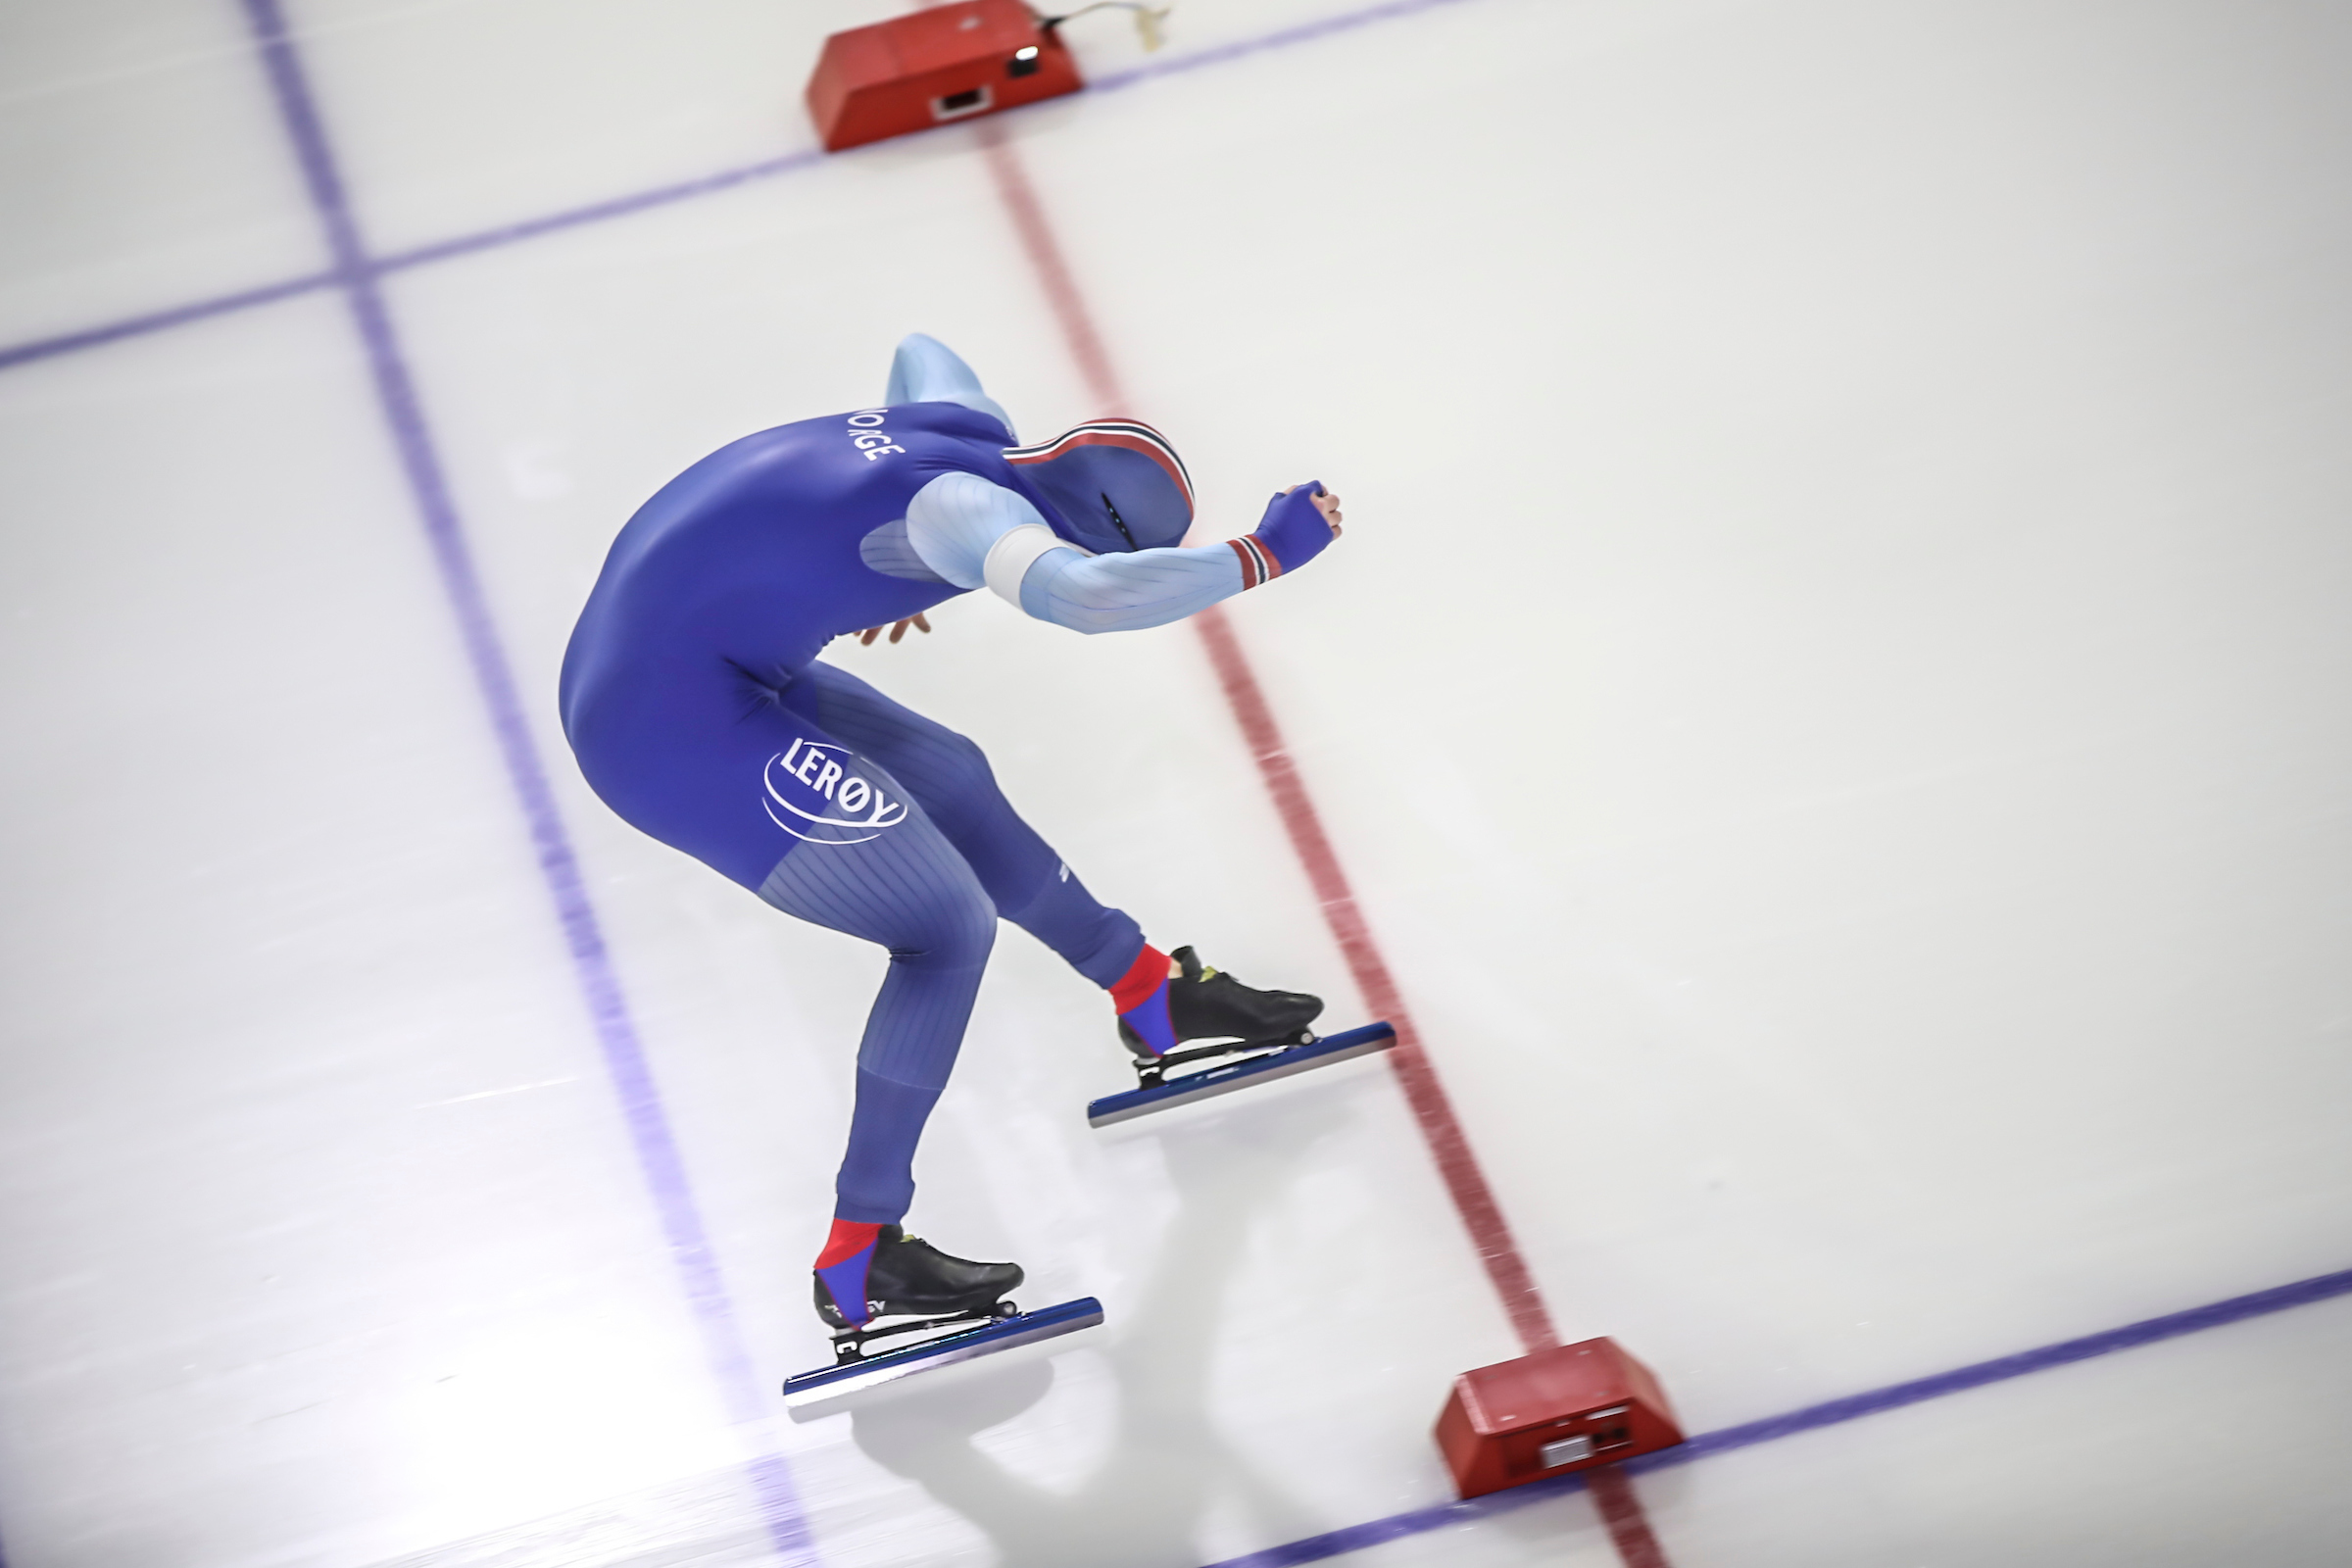 How to time speed skating